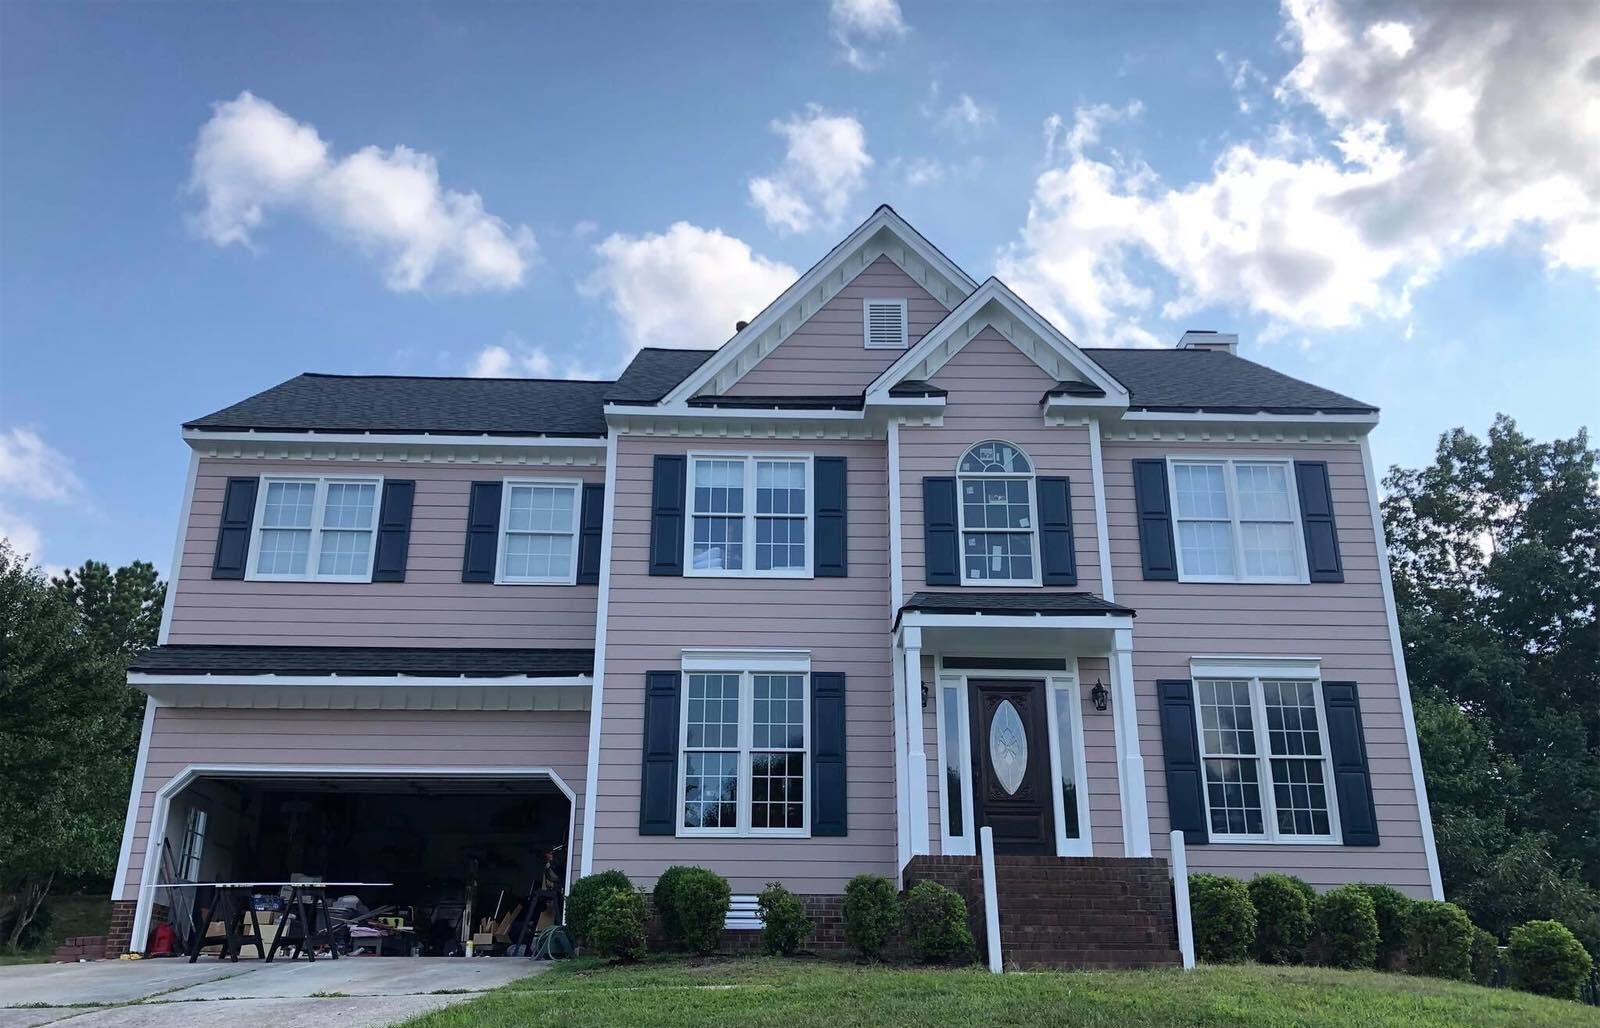 Professional house painters meticulously create captivating interiors in Cary, NC - how long is the drying time for exterior paint